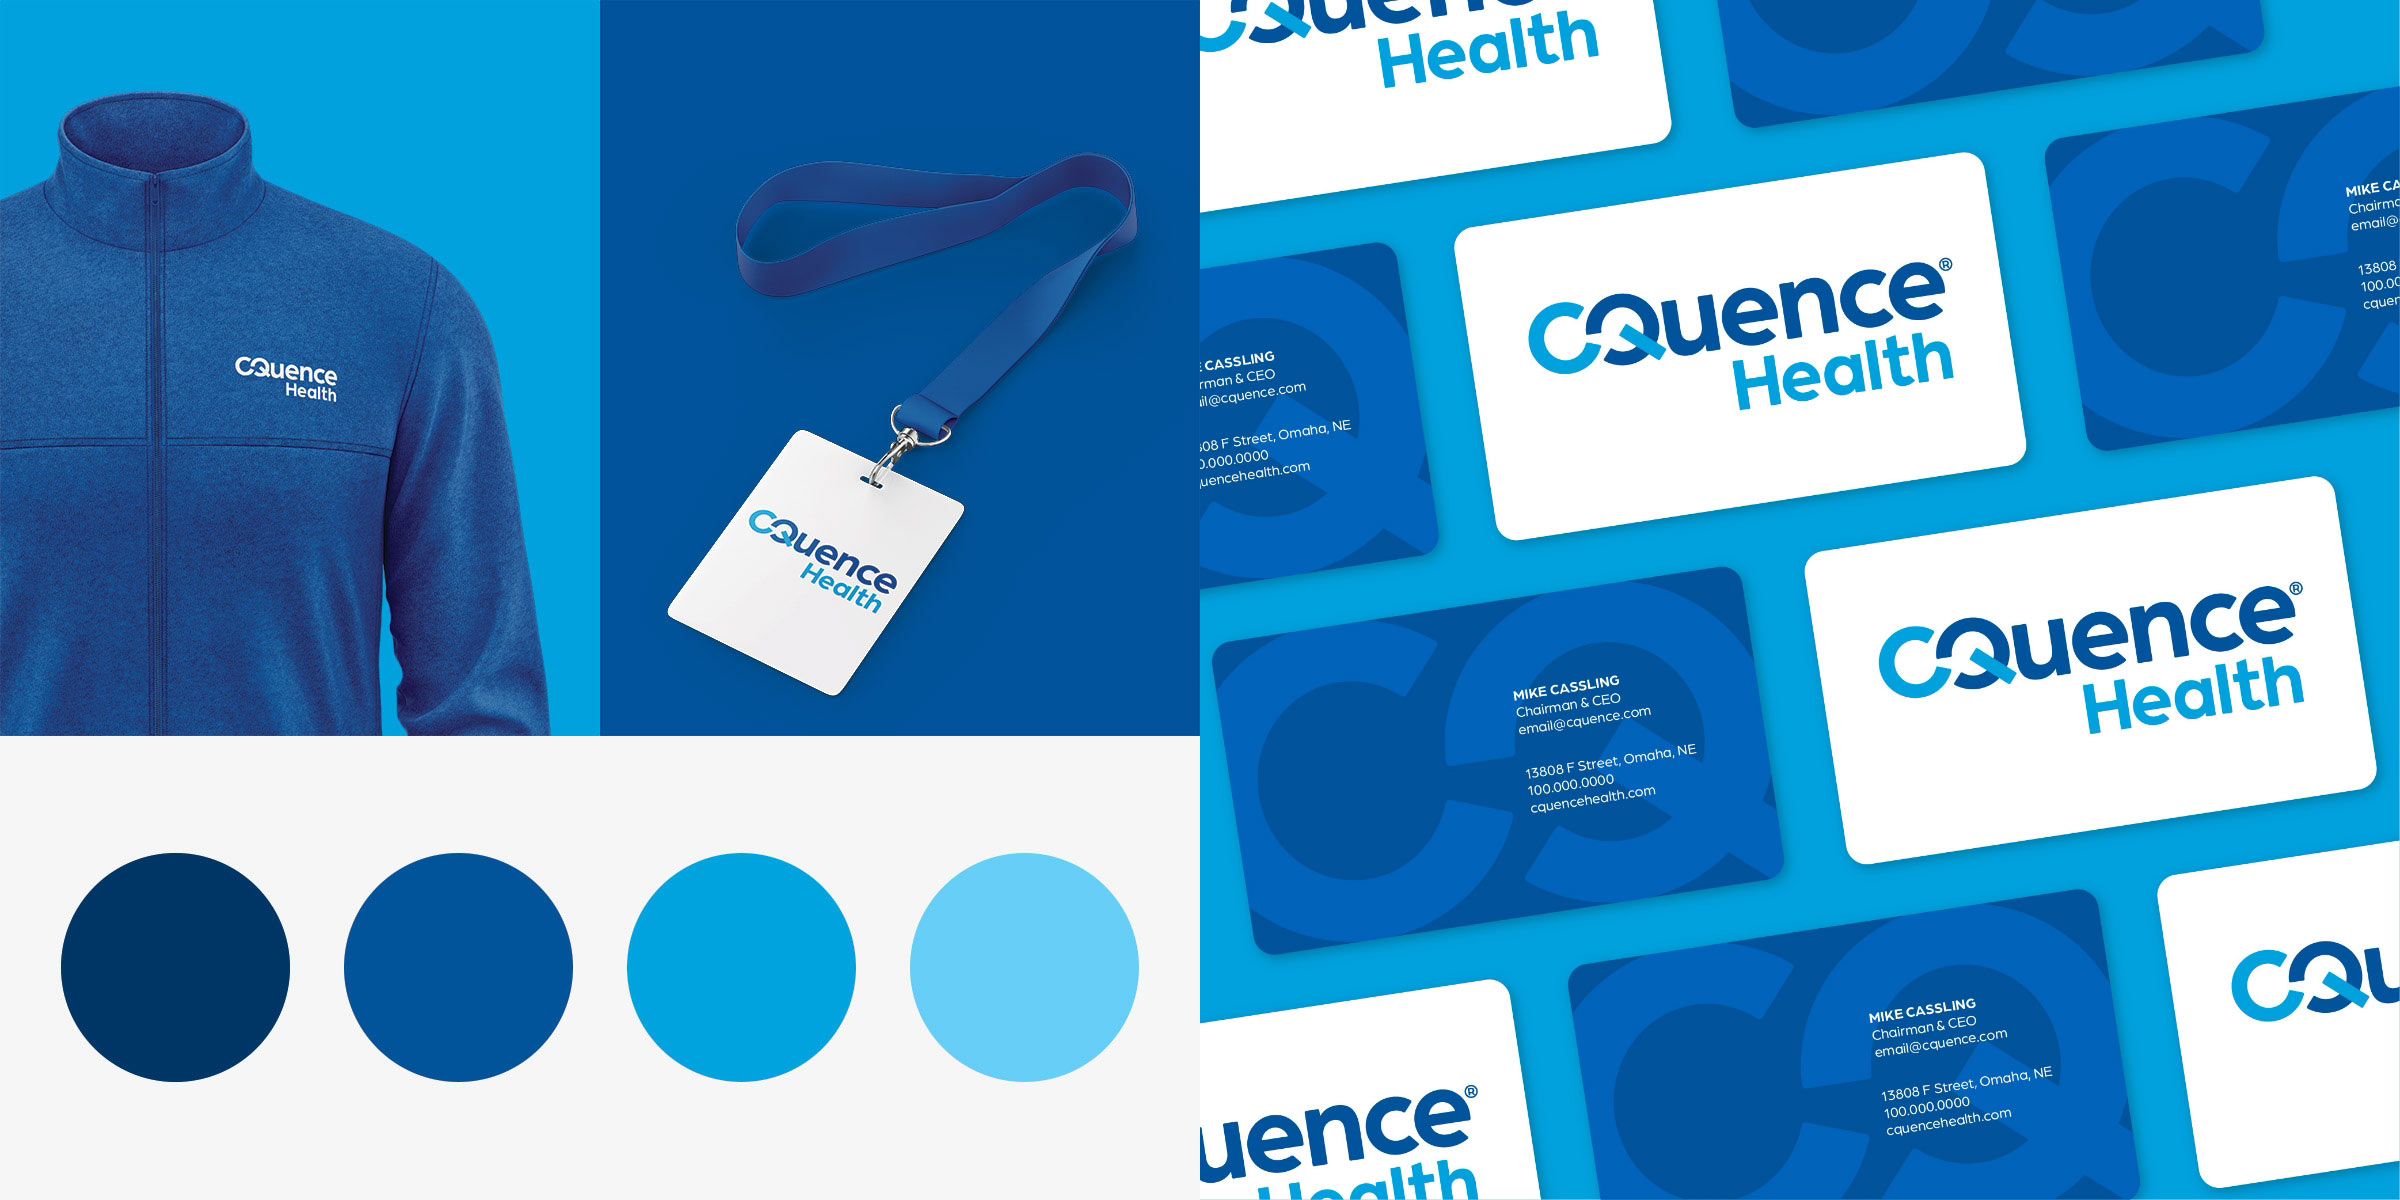 CQuence Health Branded Elements